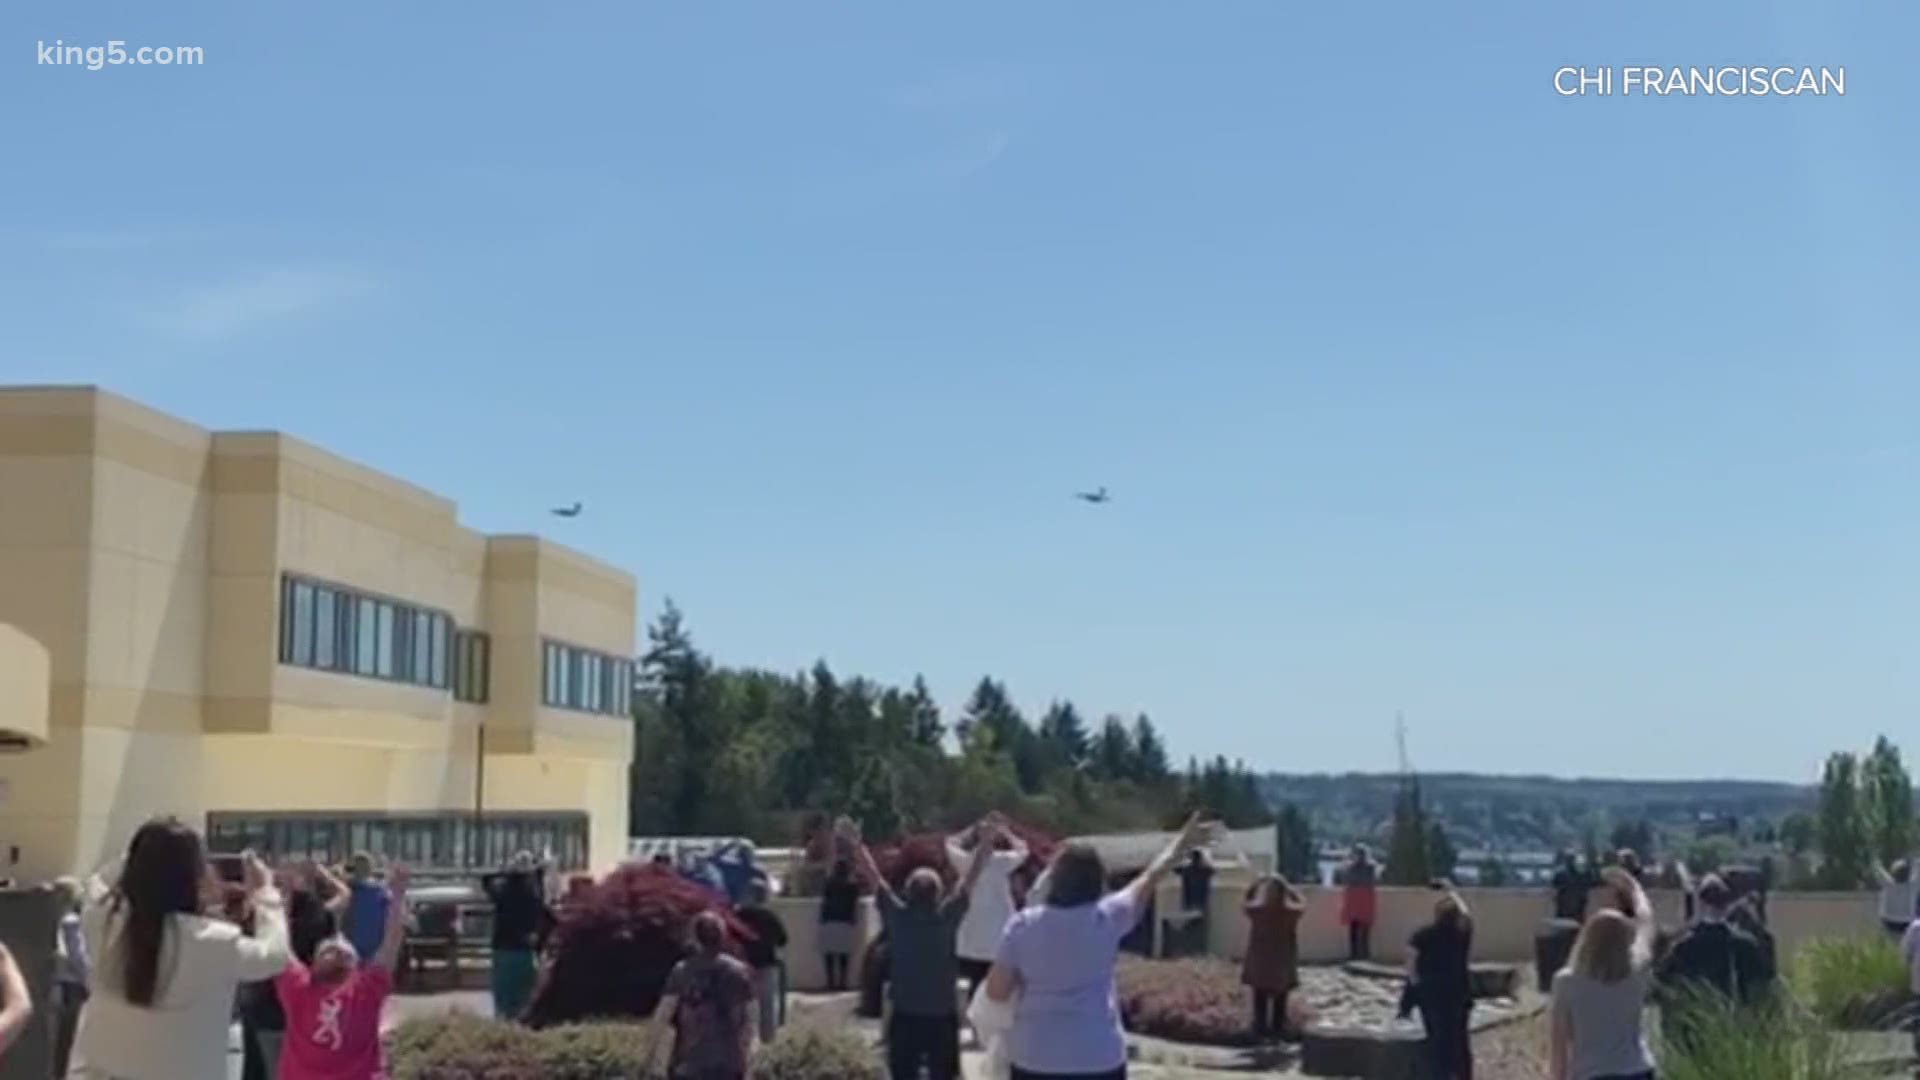 Two C-17s flew over the Puget Sound region to salute people working at the forefront of the coronavirus pandemic on Friday, May 8.